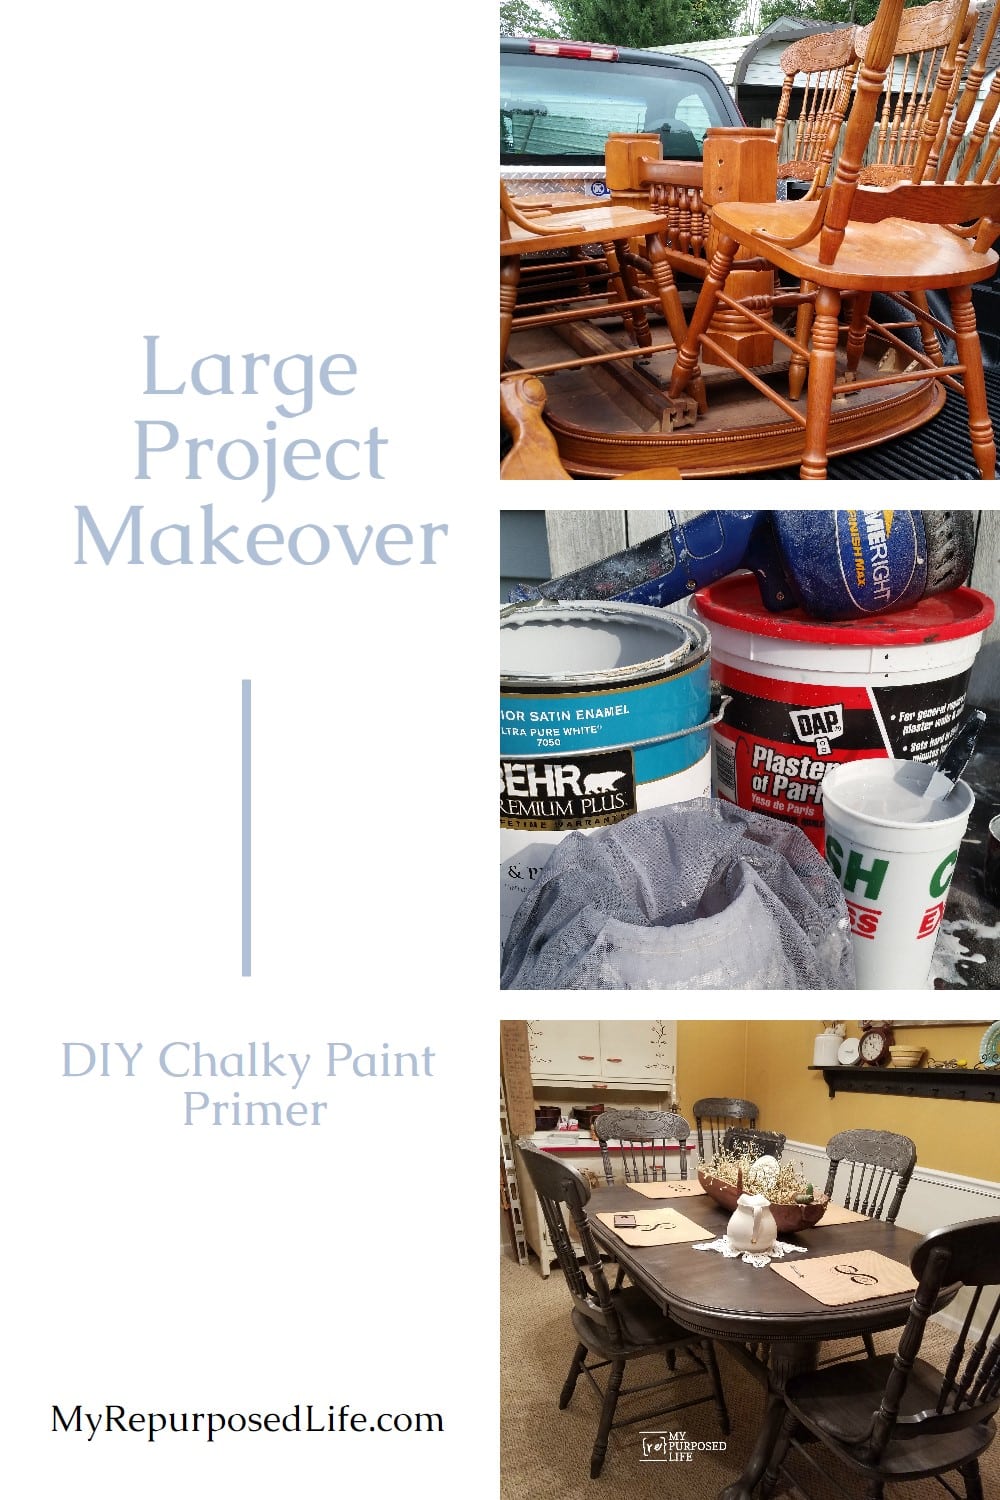 A very large furniture project may seem daunting, but taking it one step at a time will get it done. Using a DIY chalky paint primer will save you money. via @repurposedlife